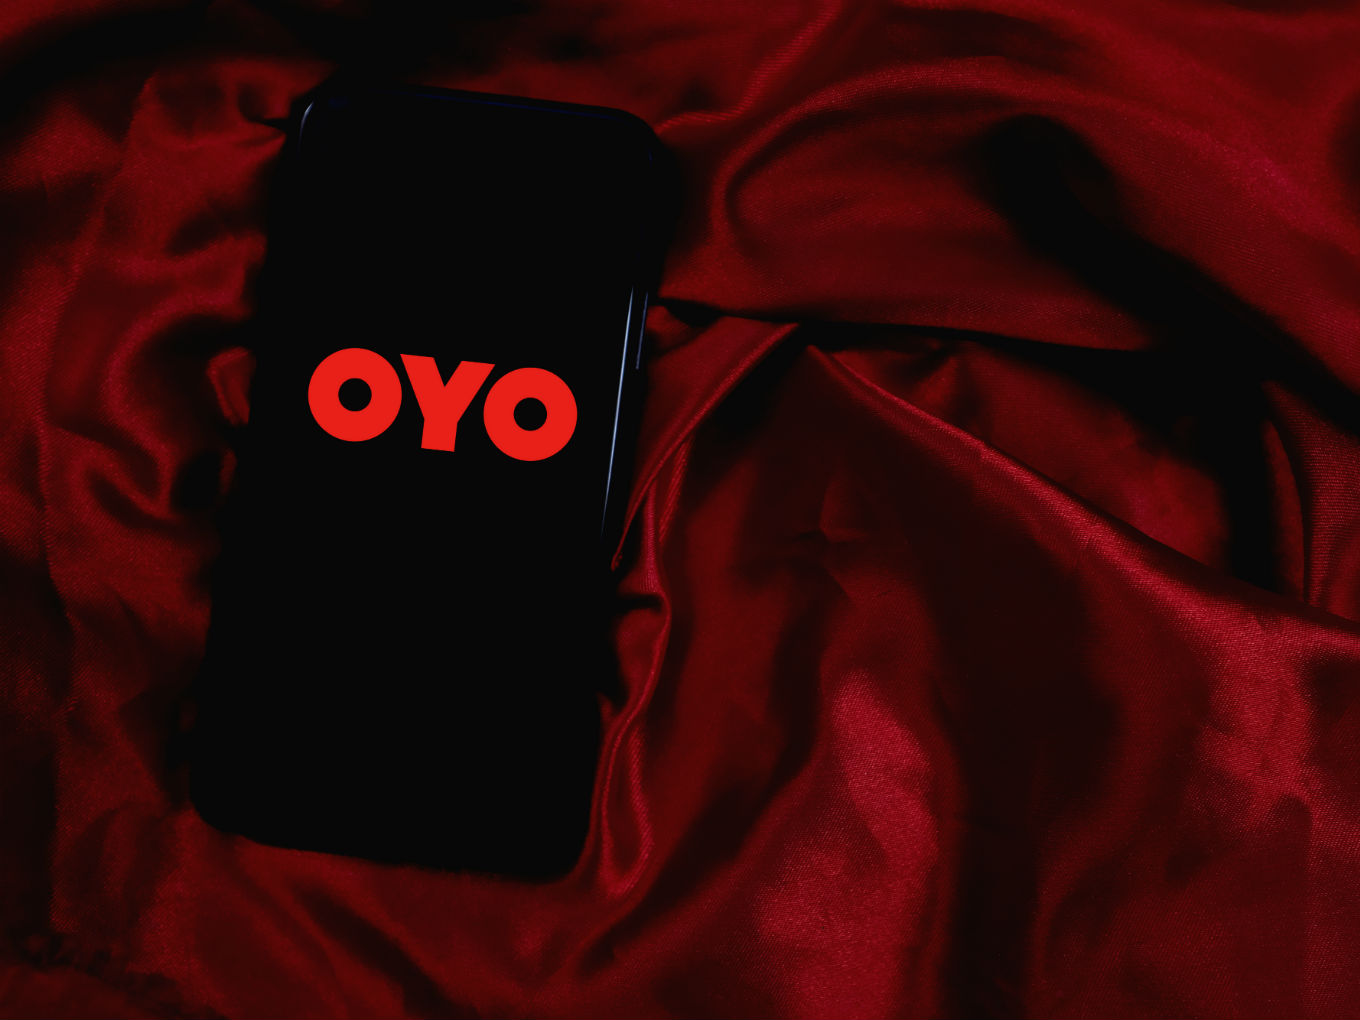 OYO Lays Off Around One-Third Of Total US Employees After India, China